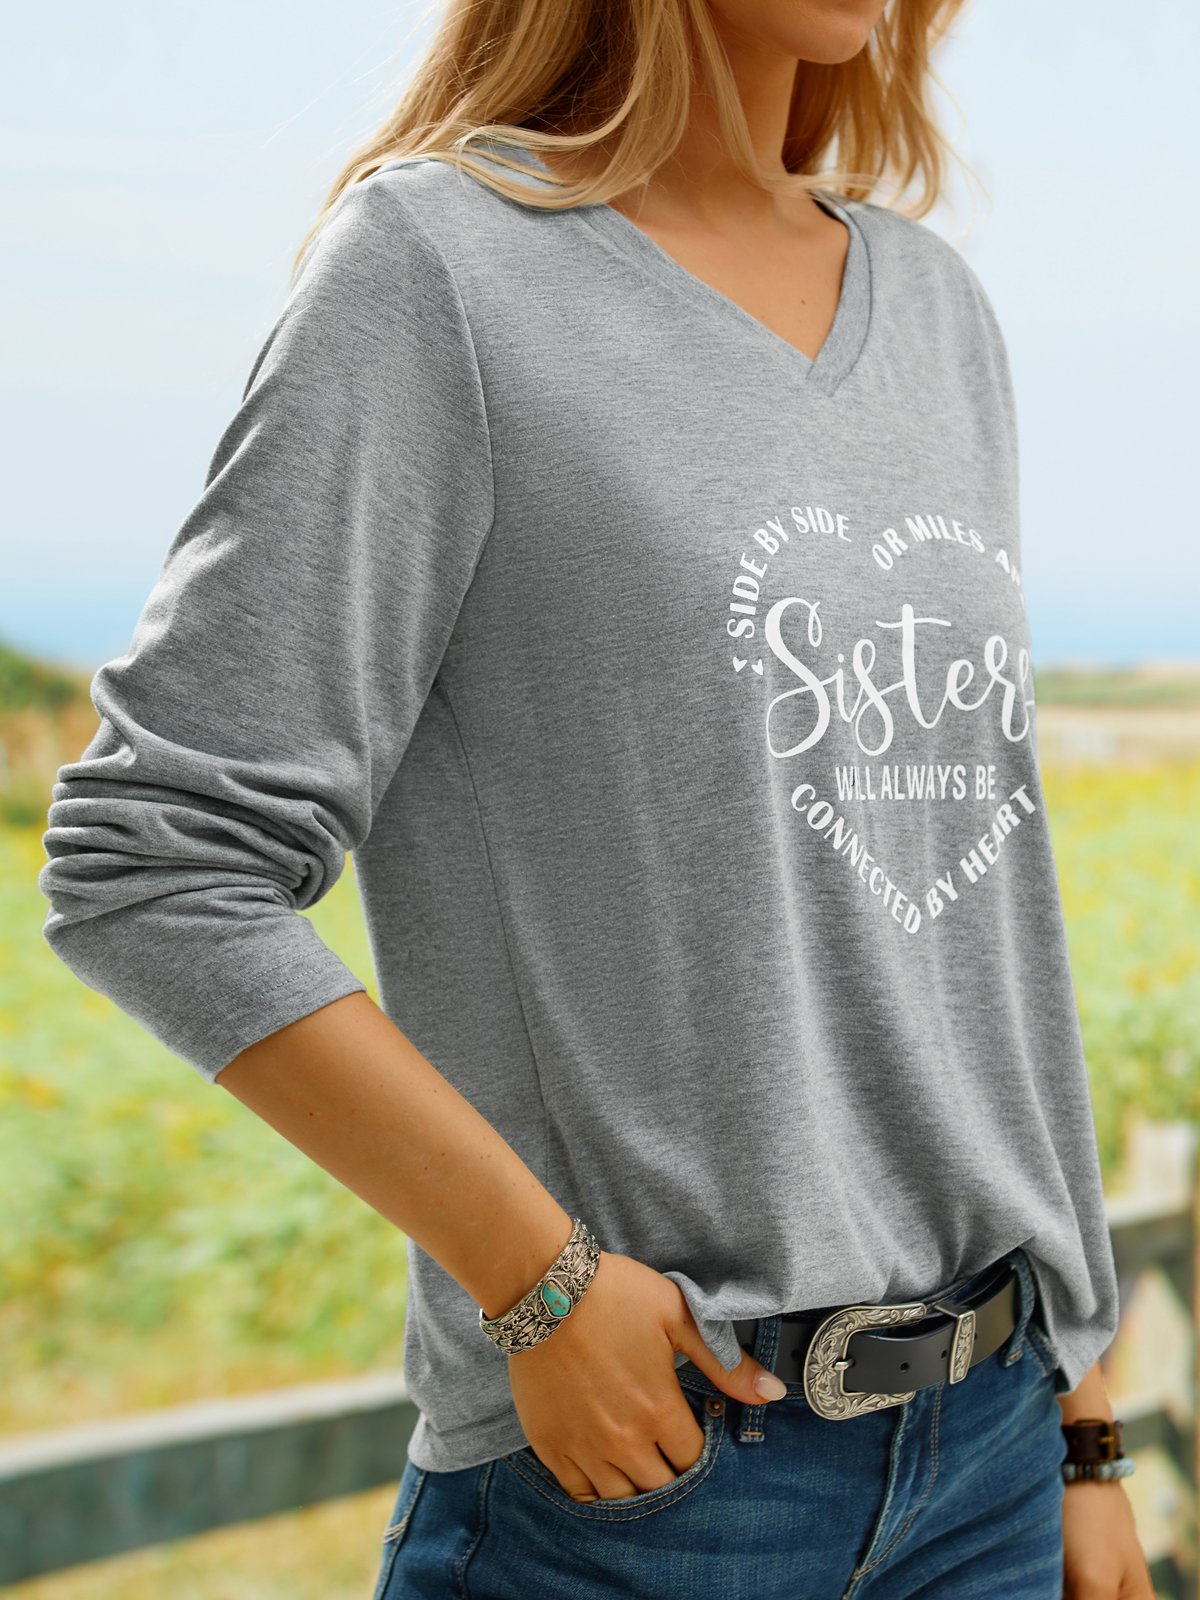 Women Sister Text Letters Regular Fit Casual V Neck T-Shirt